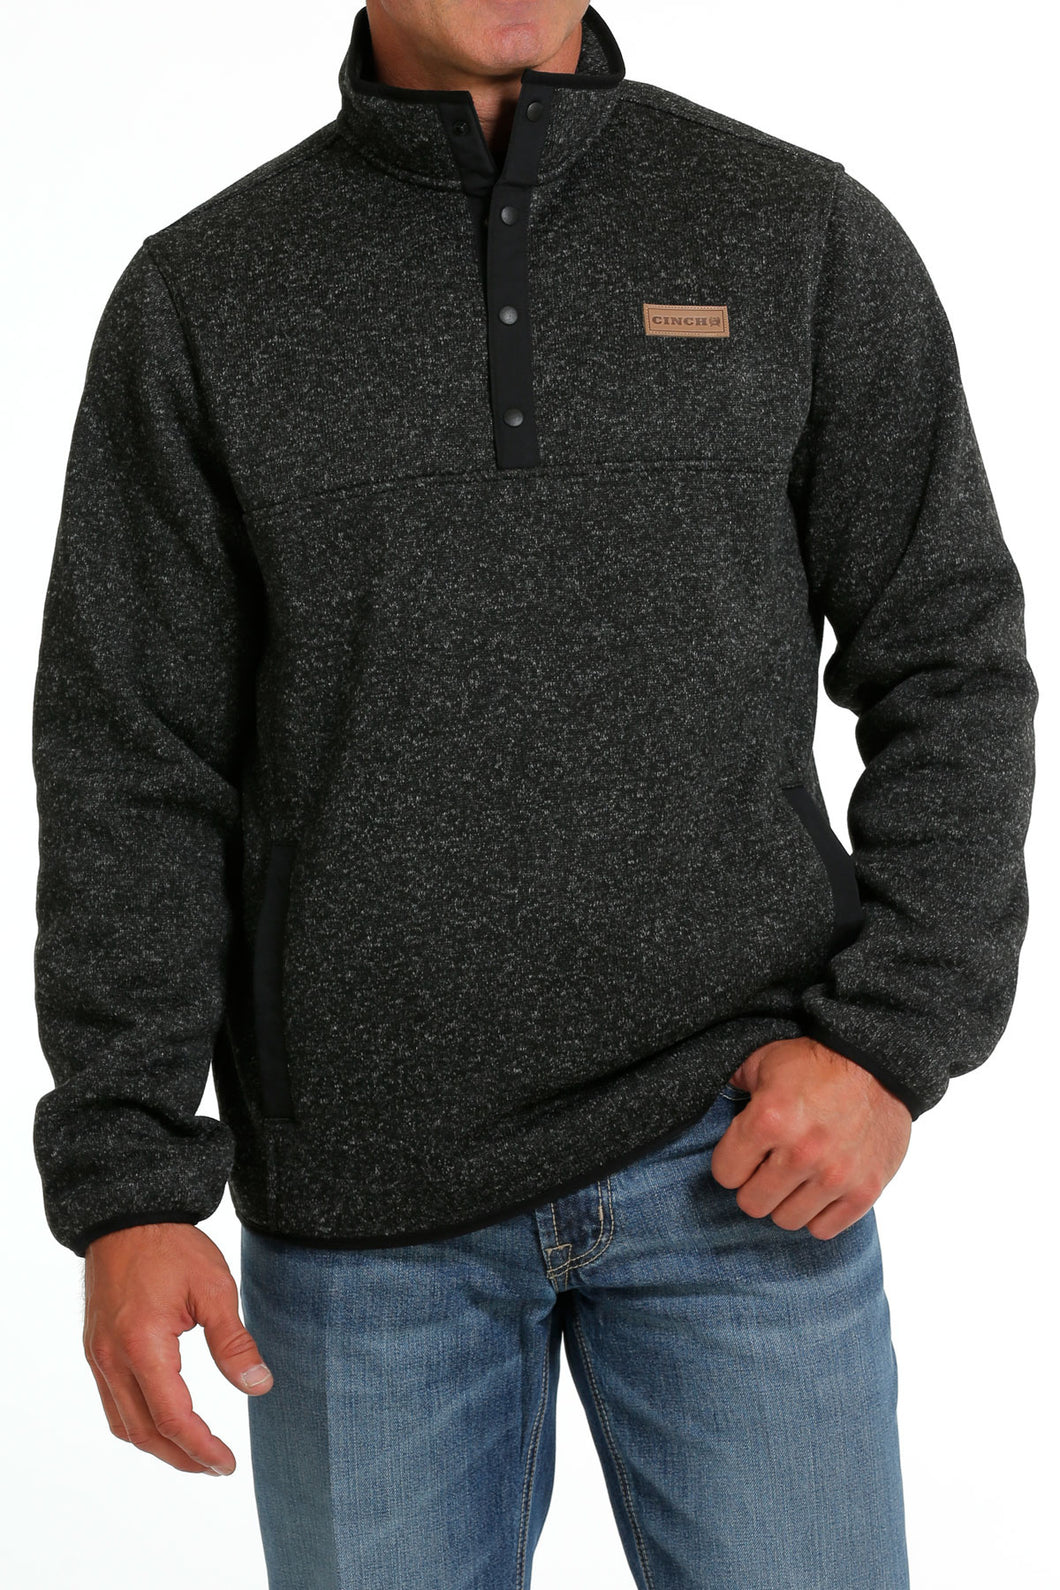 Men's Pullover Sweater by Cinch ~ Charcoal - Henderson's Western Store